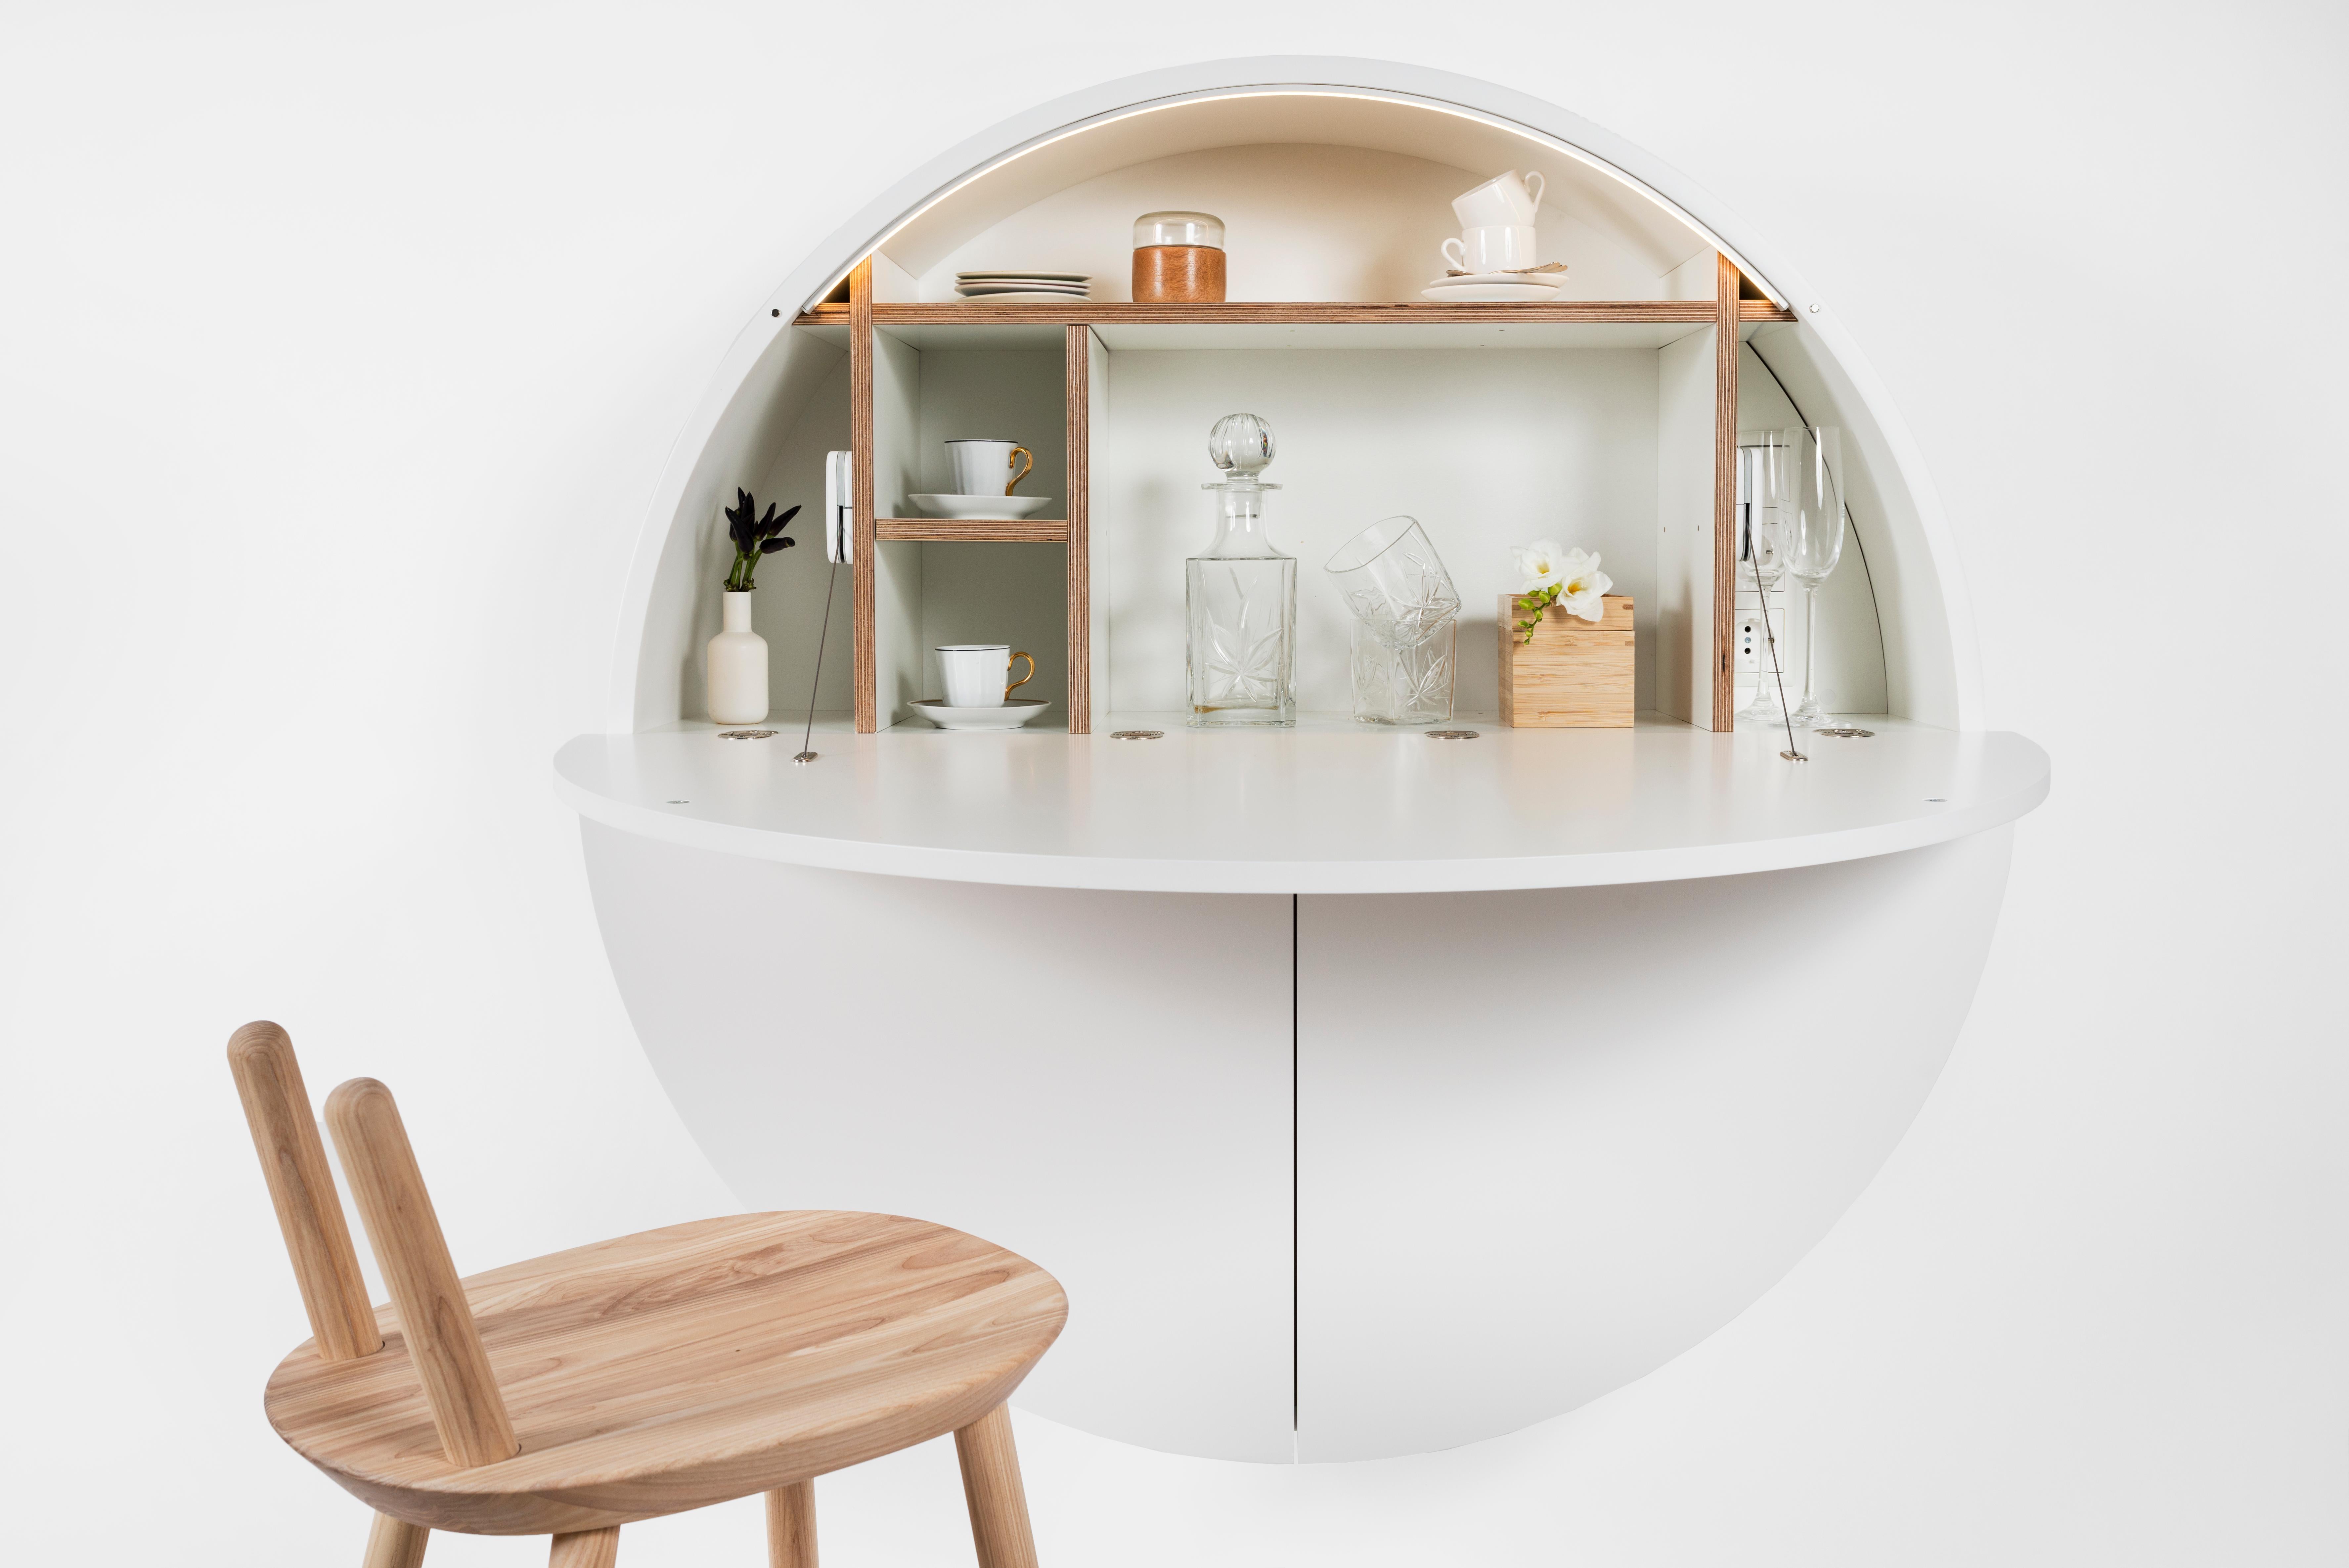 The Multifunctional Pill works great in the treatment against clutter and messy environments. The Pill is a round cabinet that works fixed to a wall and can instantly transform into a fully-functional working place, a dressing table, or even a